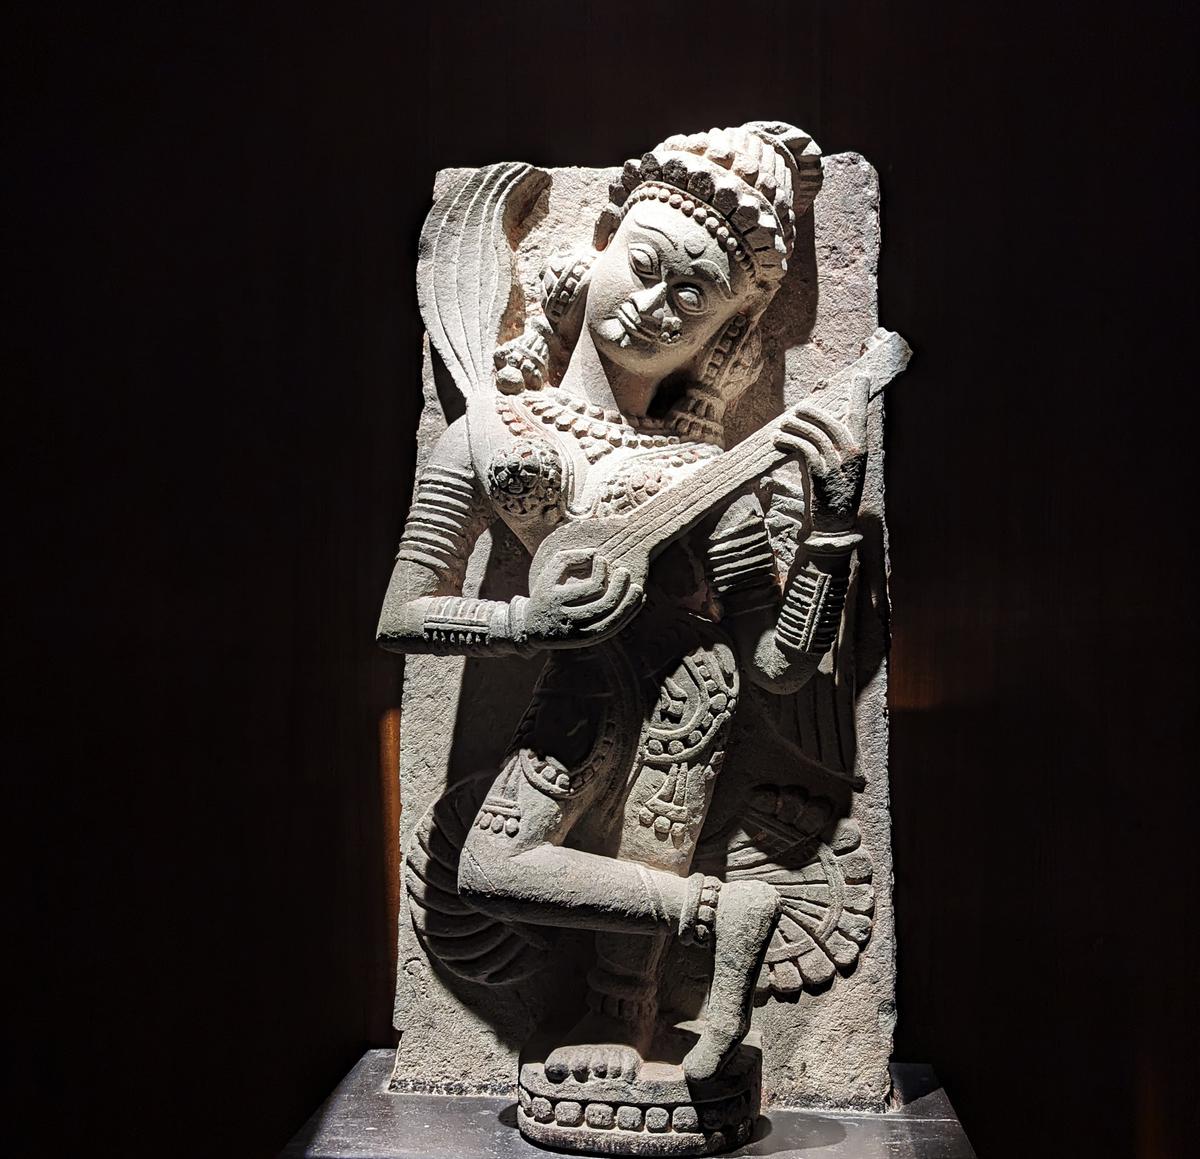 Western India’s stone sculpture from the 15th century titled ‘Celestial musician’.